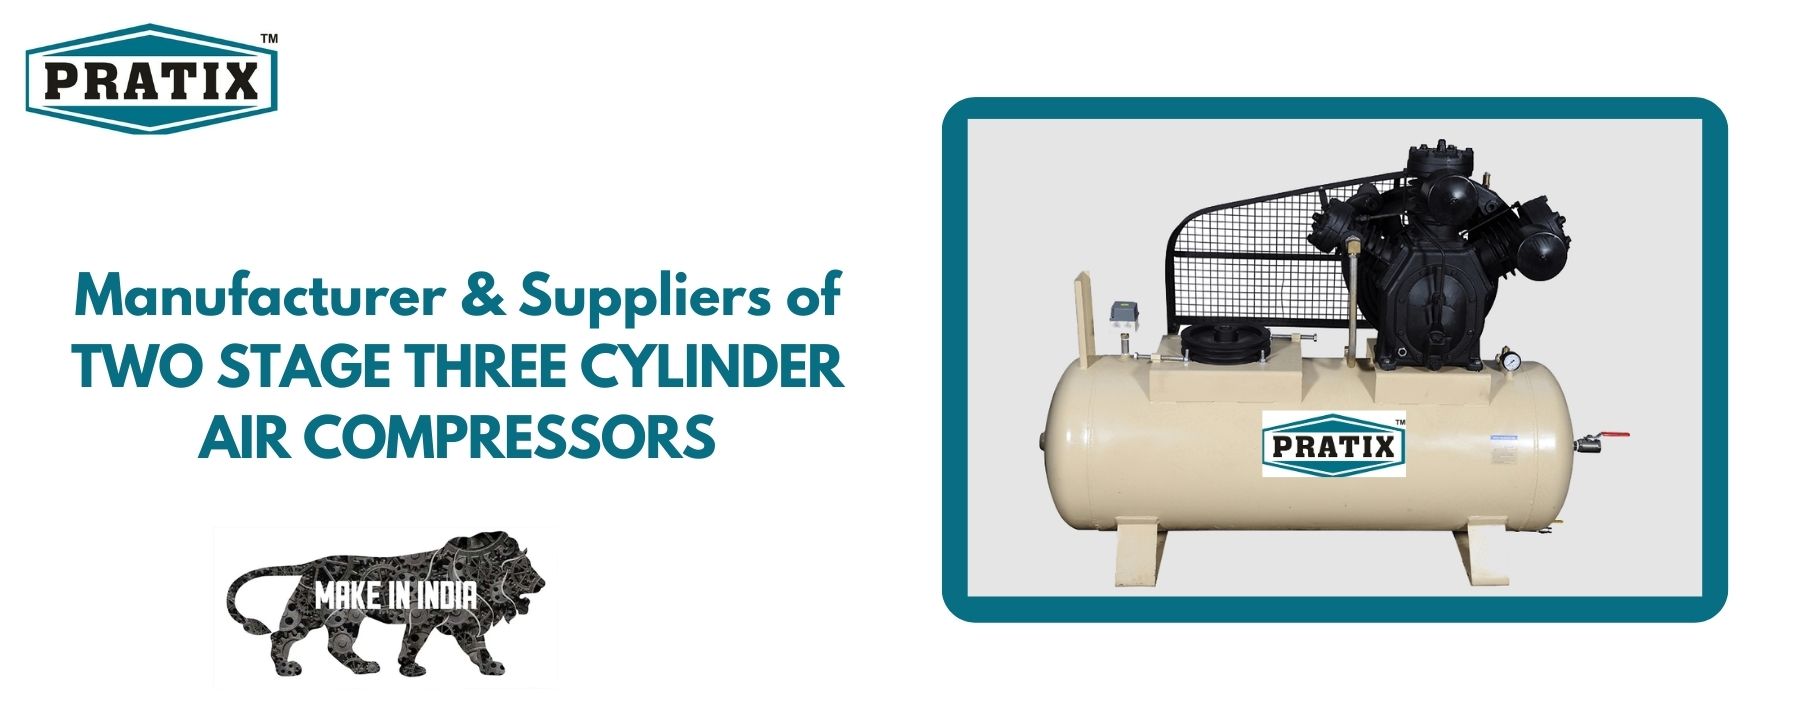 TWO STAGE THREE CYLINDER AIR COMPRESSORS